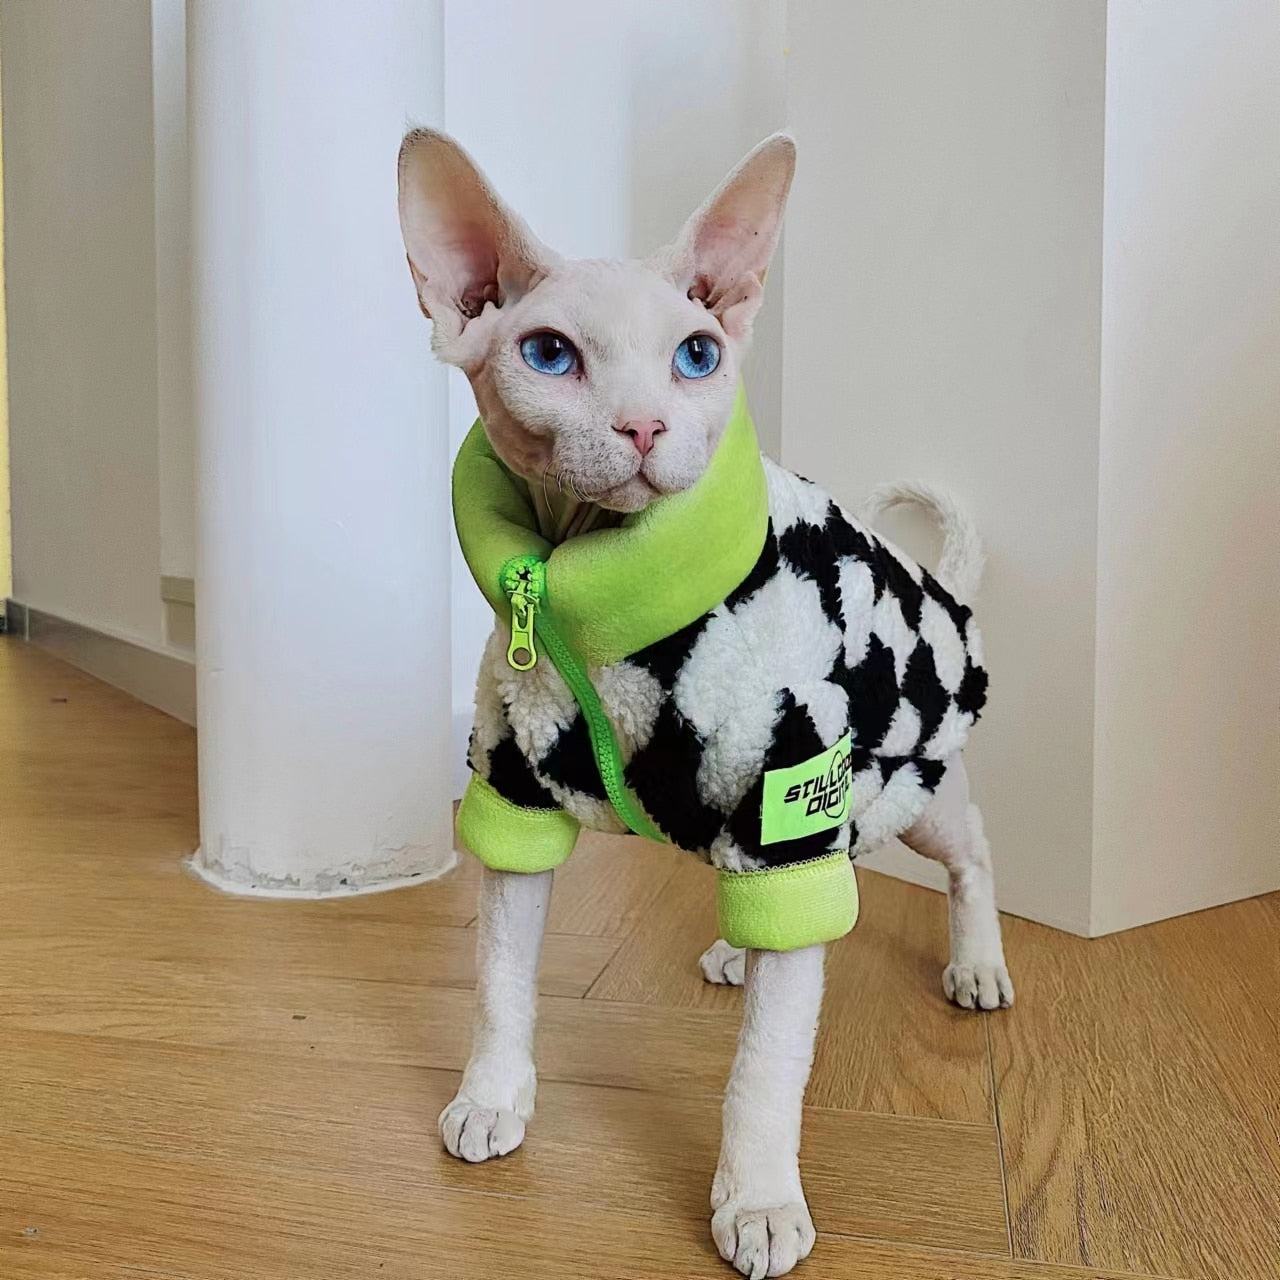 Racer Clothes for Cats - Clothes for cats